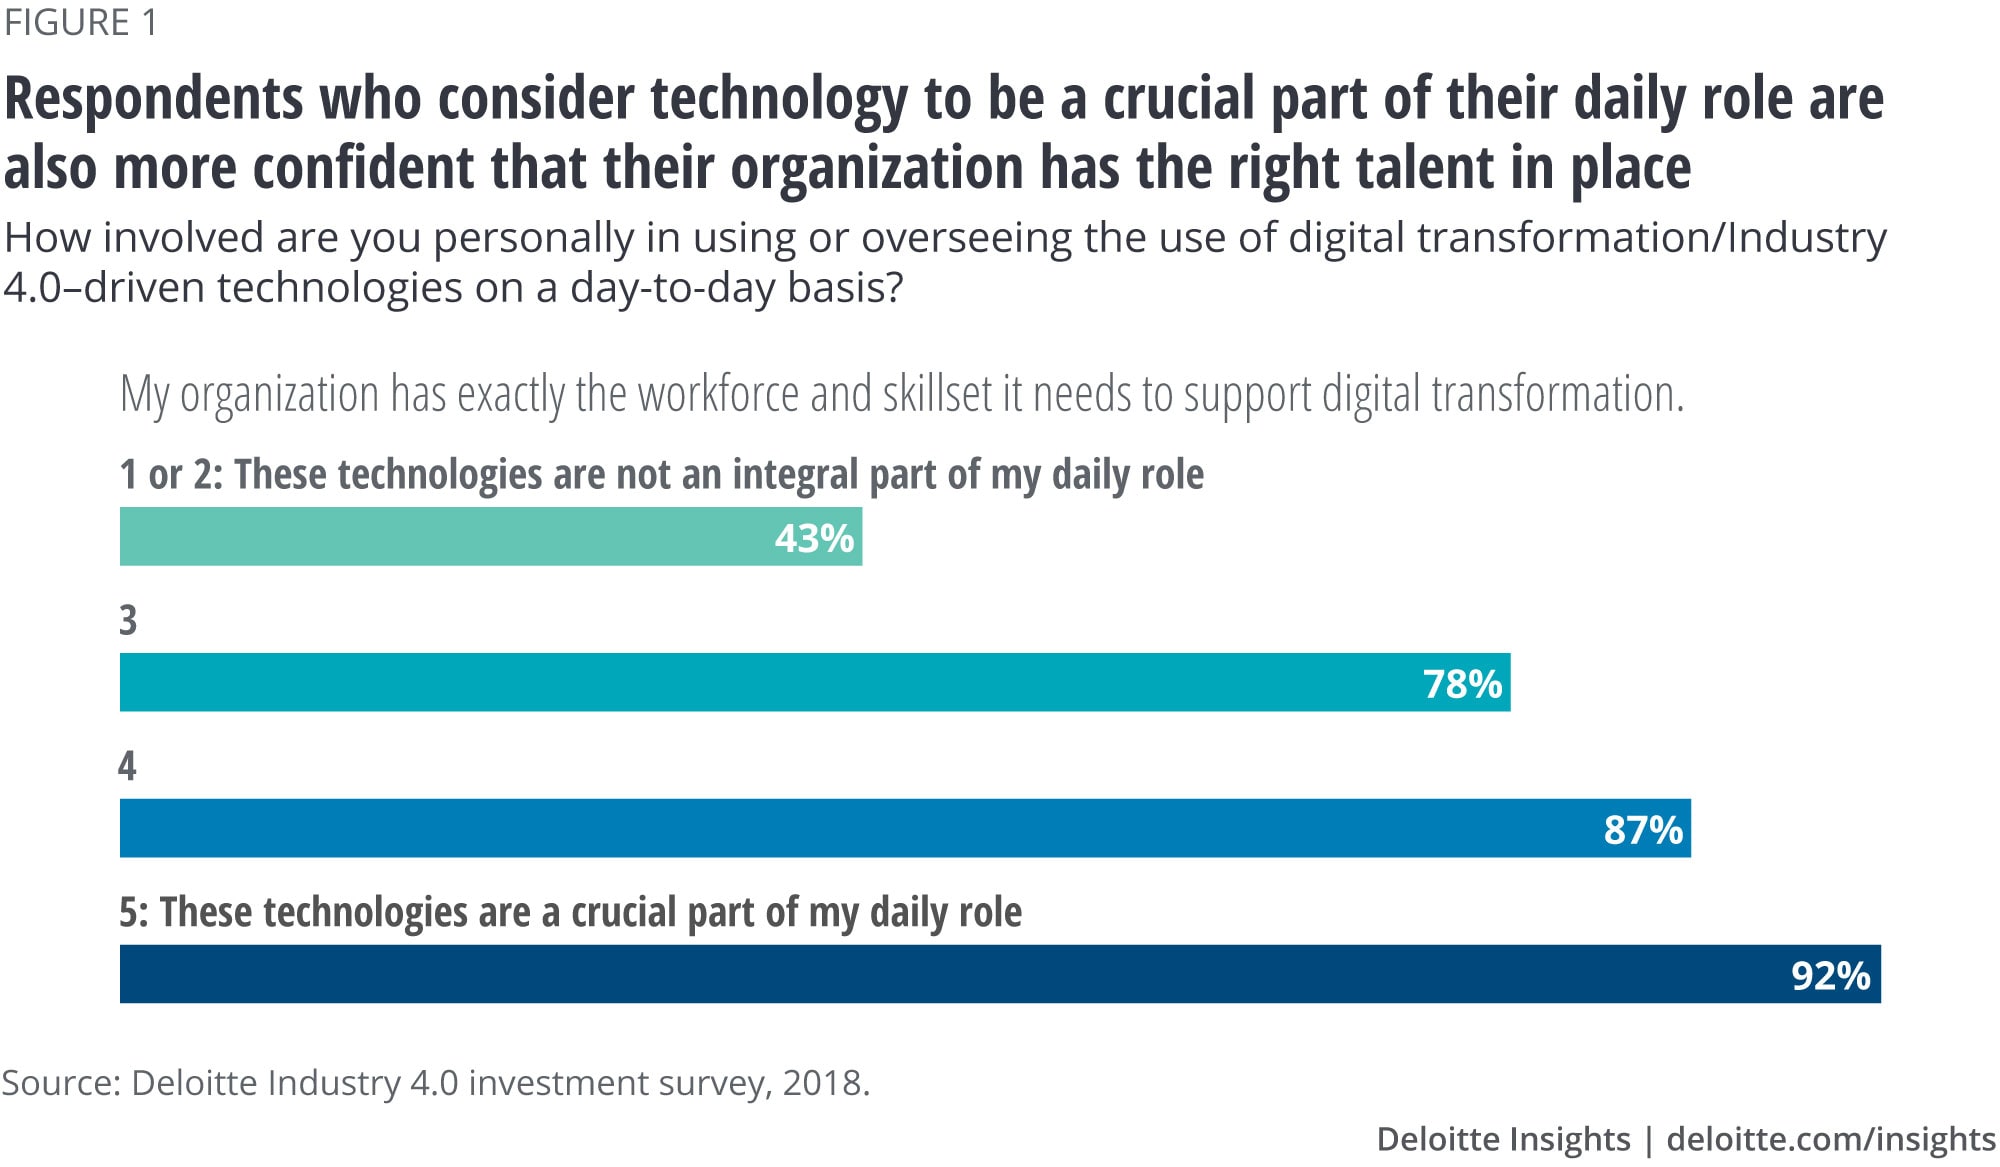 Respondents who consider technology to be a crucial part of their daily role are also more confident that their organization has the right talent in place